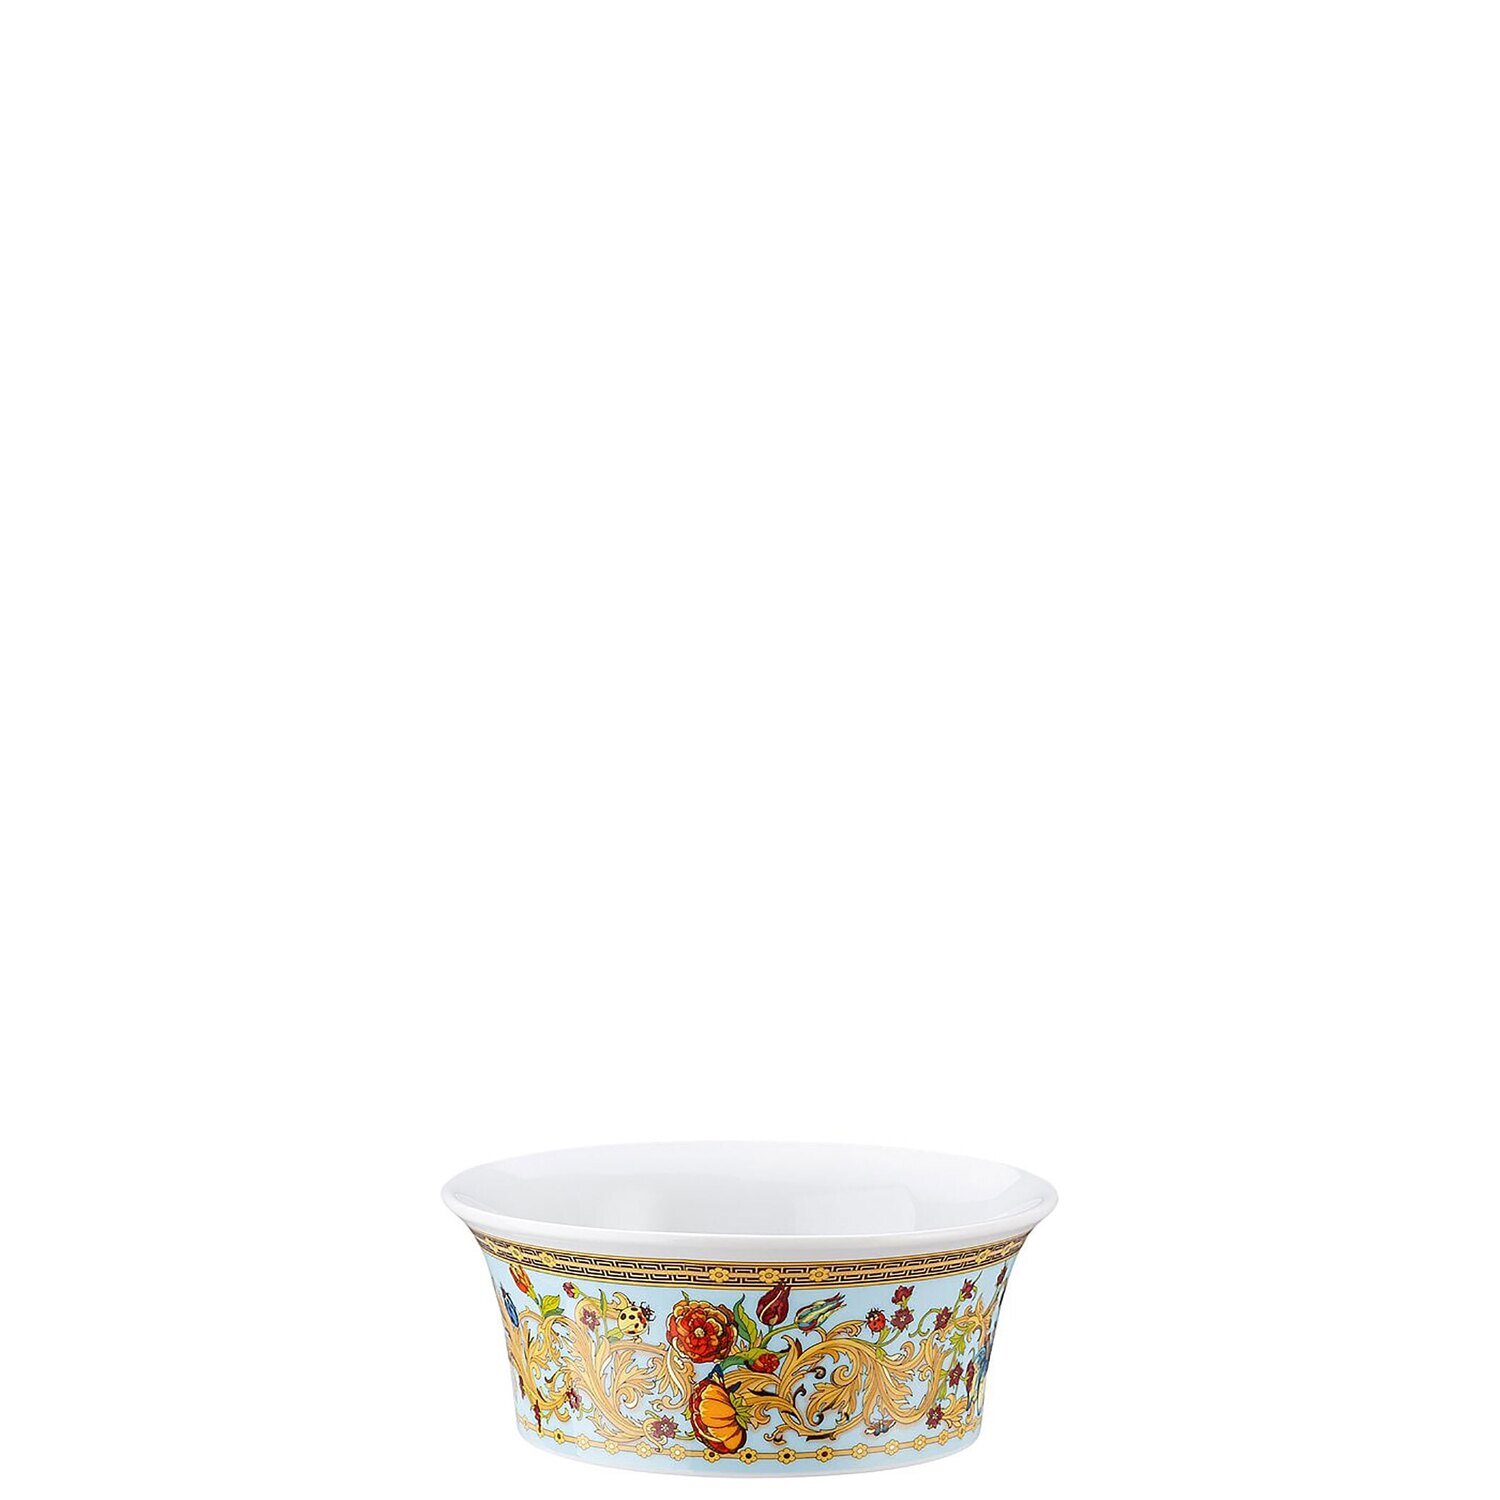 Versace Butterfly Garden Cereal Bowl 5 1/2 Inch